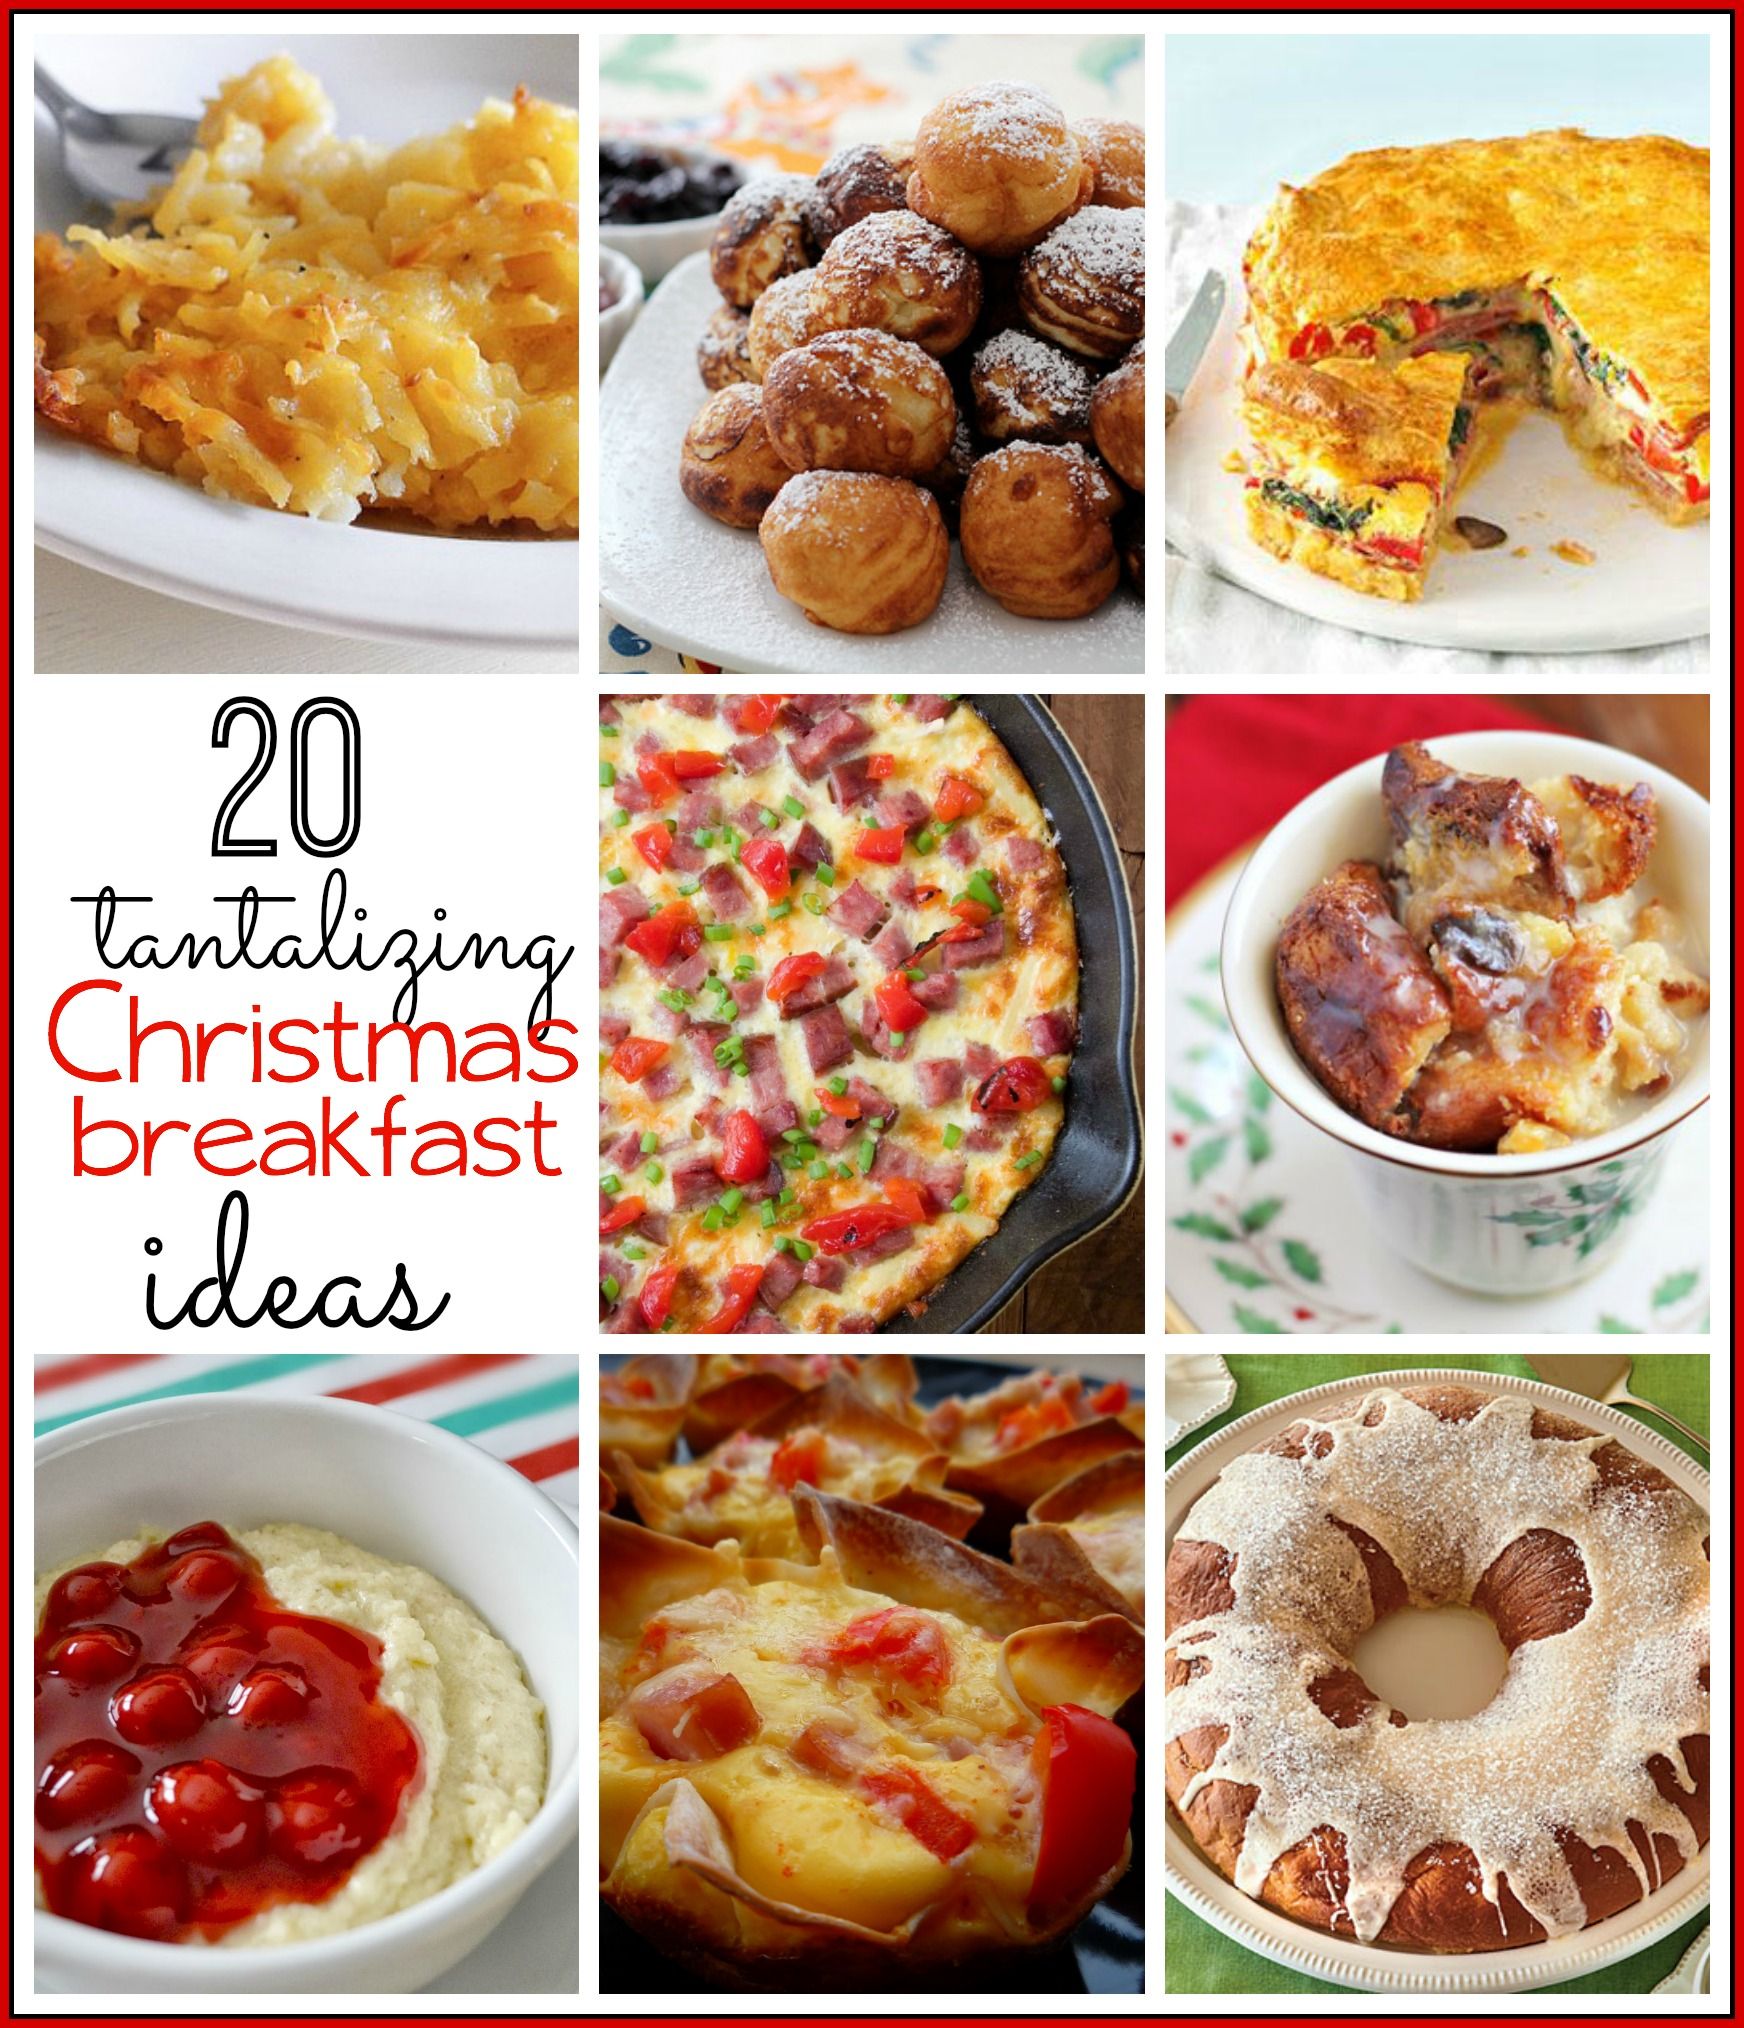 Christmas breakfast ideas Great Collection